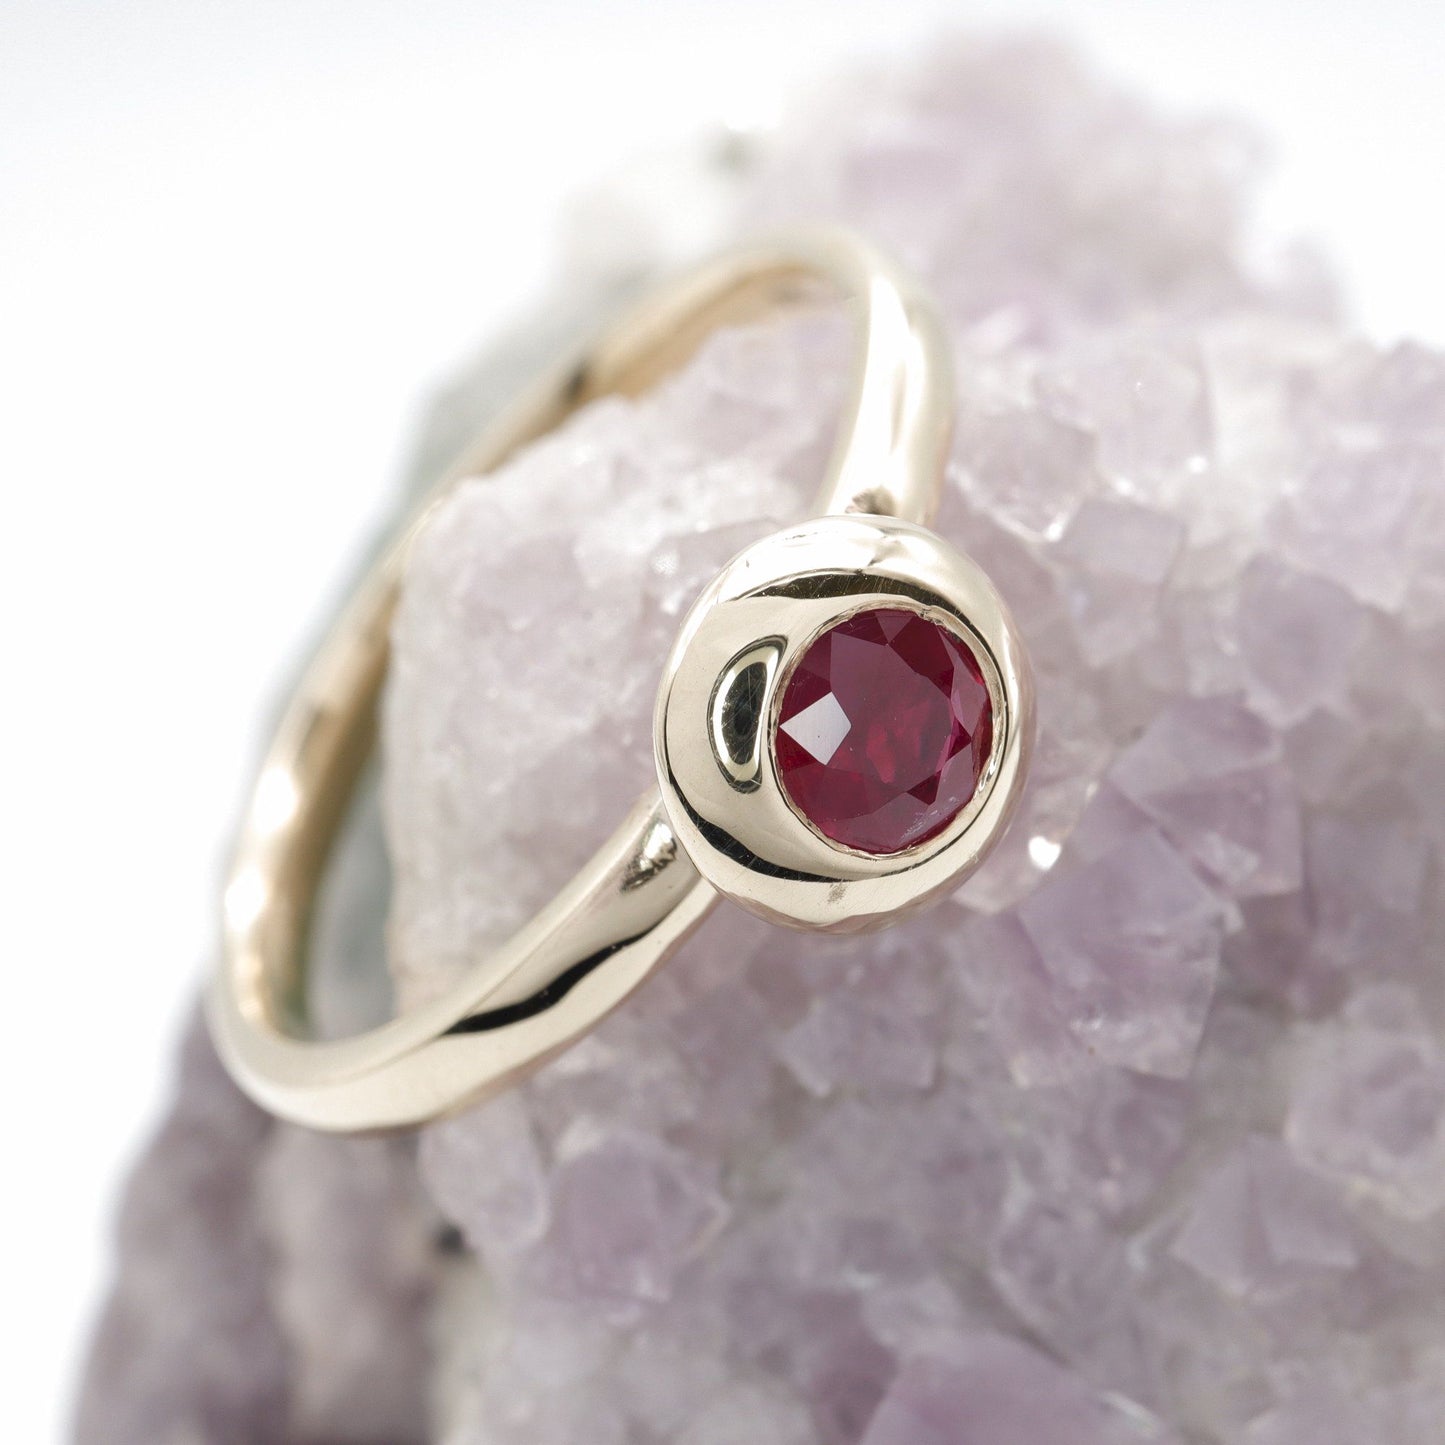 Solitaire fine Ruby engagement ring in yellow gold.